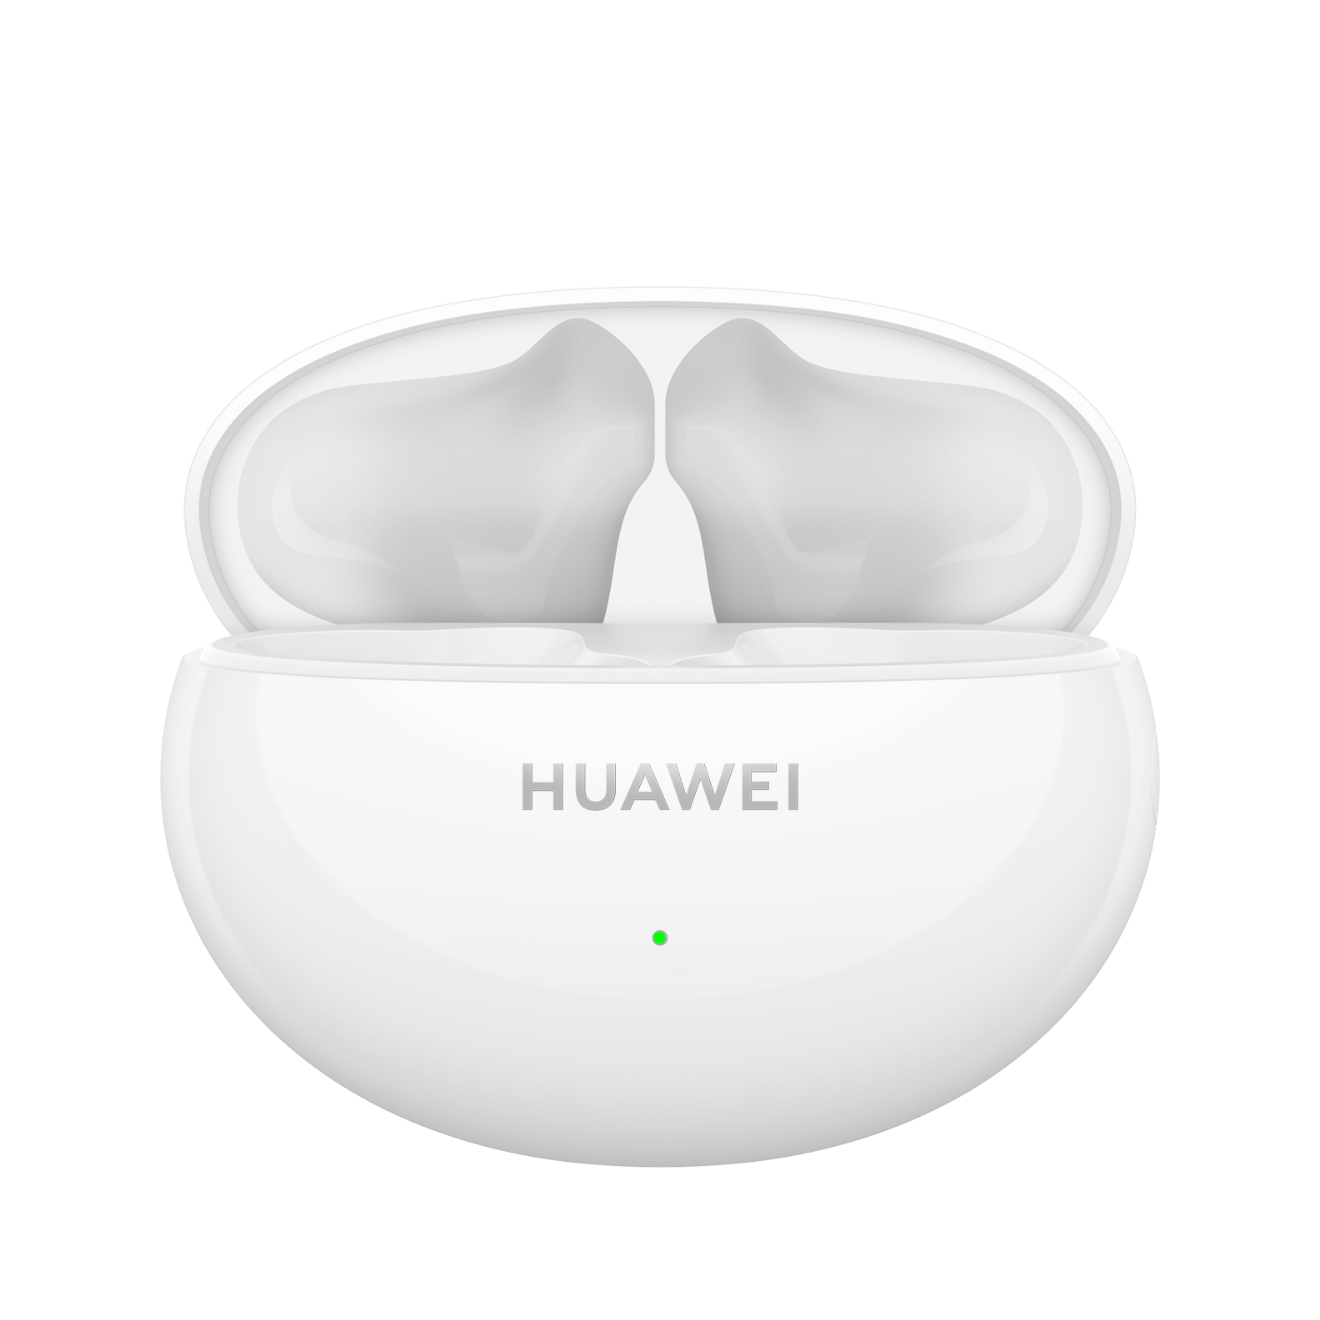 HUAWEI FreeBuds 5i Wireless Earbuds - Noise Cancelling Earphones with Long  Lasting Battery Life - Bluetooth and Water Resistant in-ear Headphones with